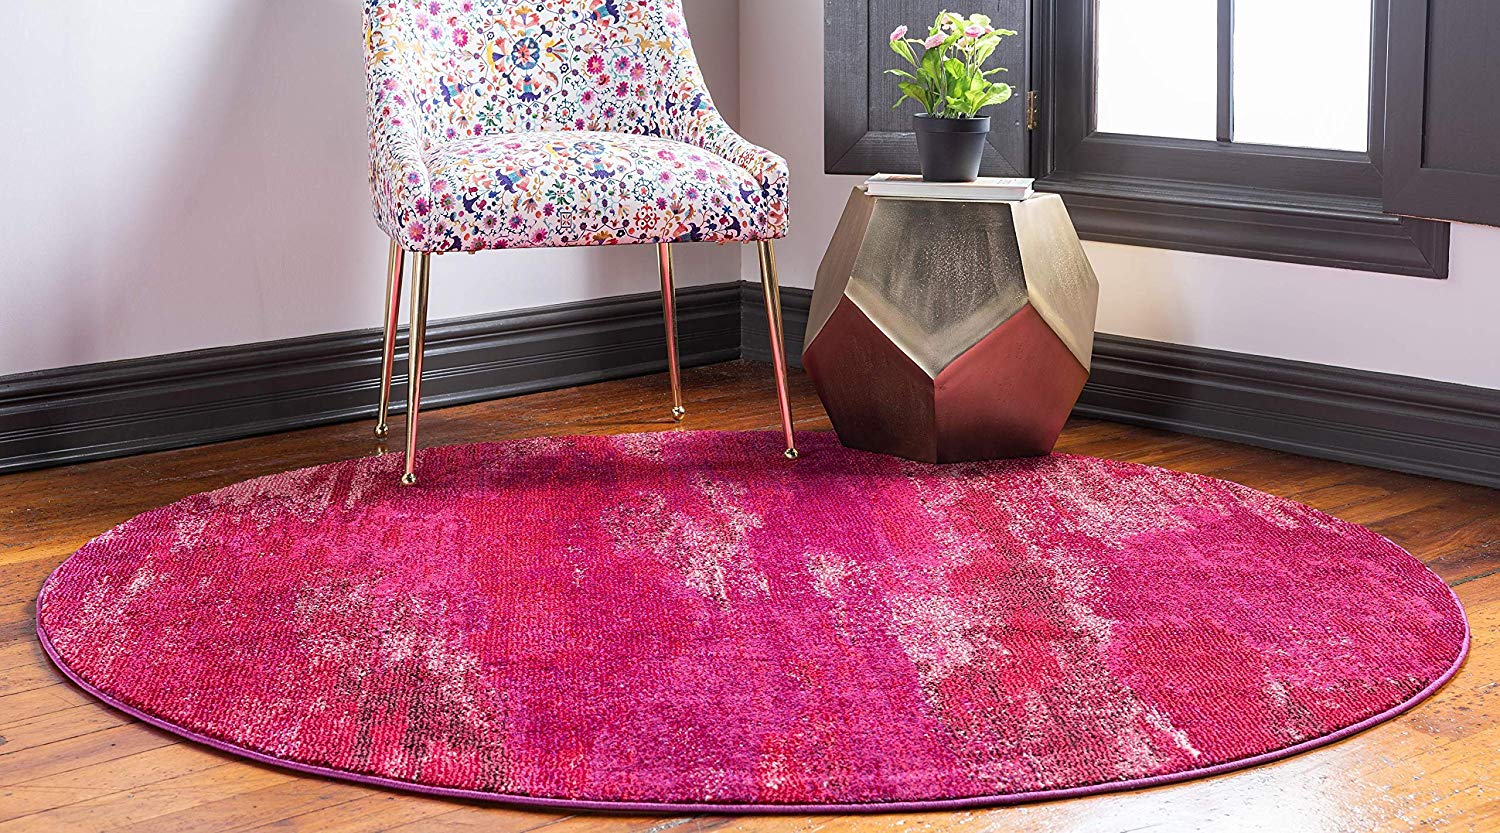 2' x 3' Ivory and Magenta Tribal Pattern Scatter Rug